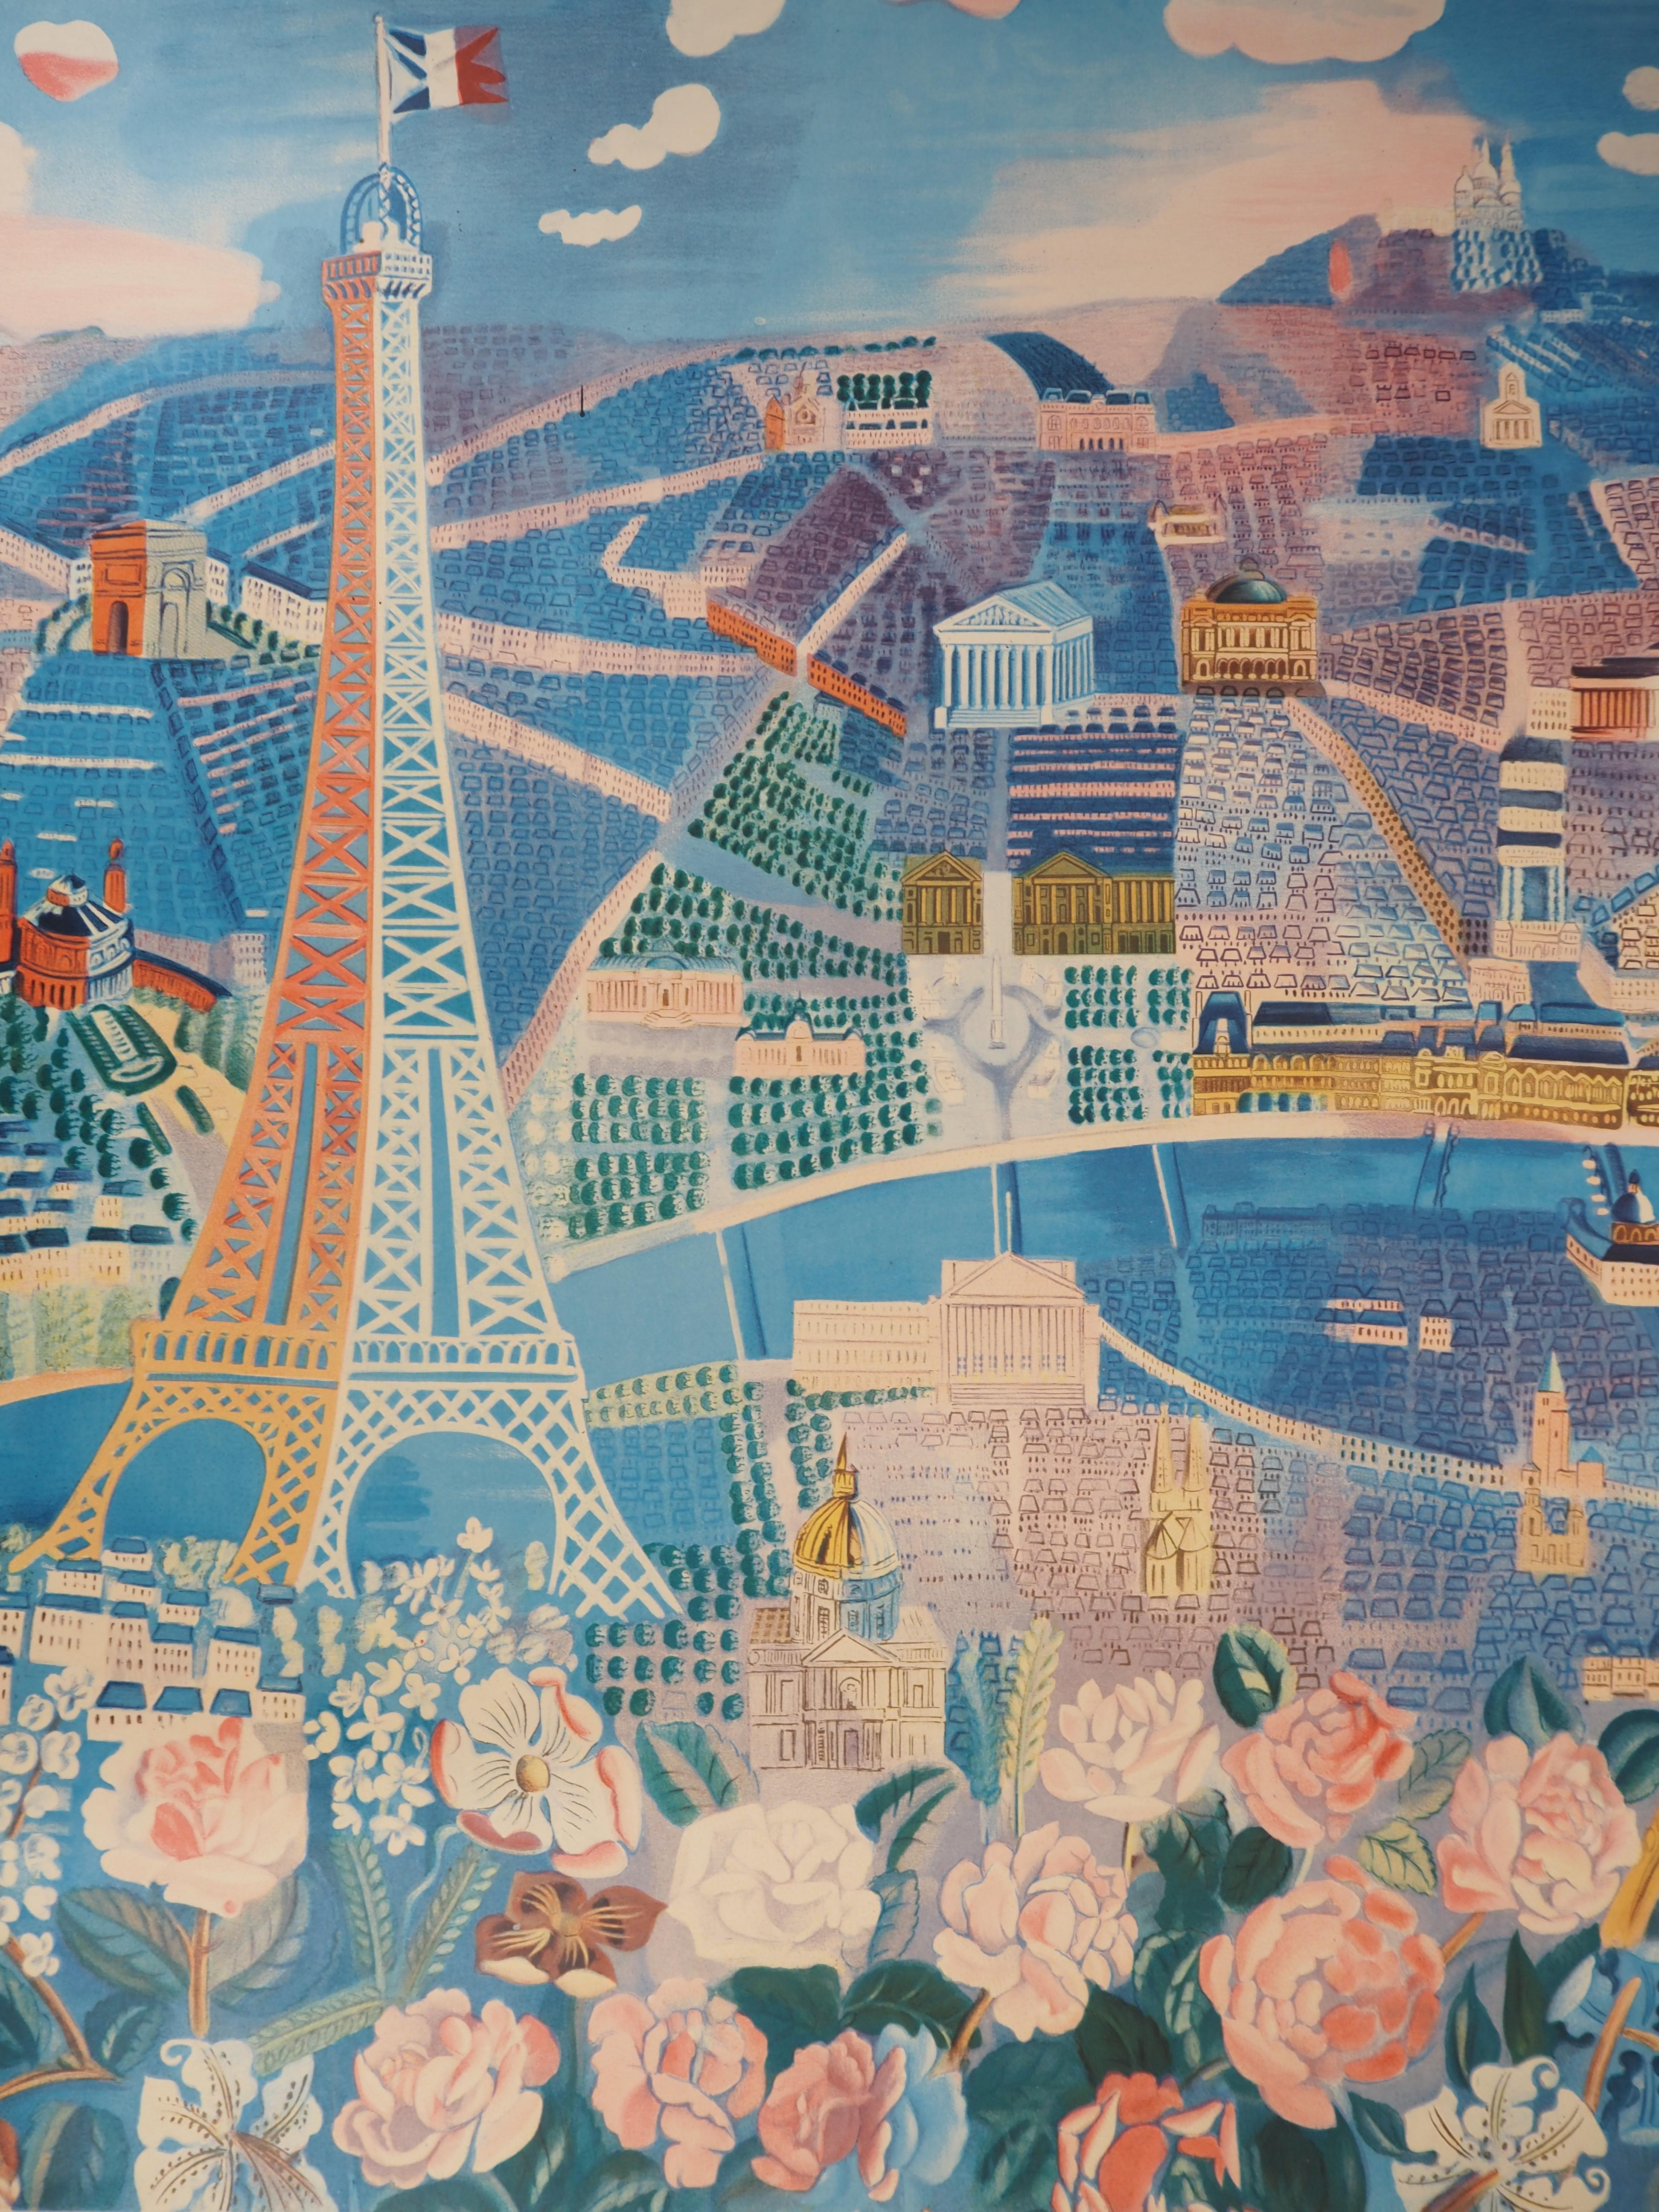 Spring in France : Paris, Rose and Eiffel Tower - Photolithograph Poster - Modern Print by Raoul Dufy